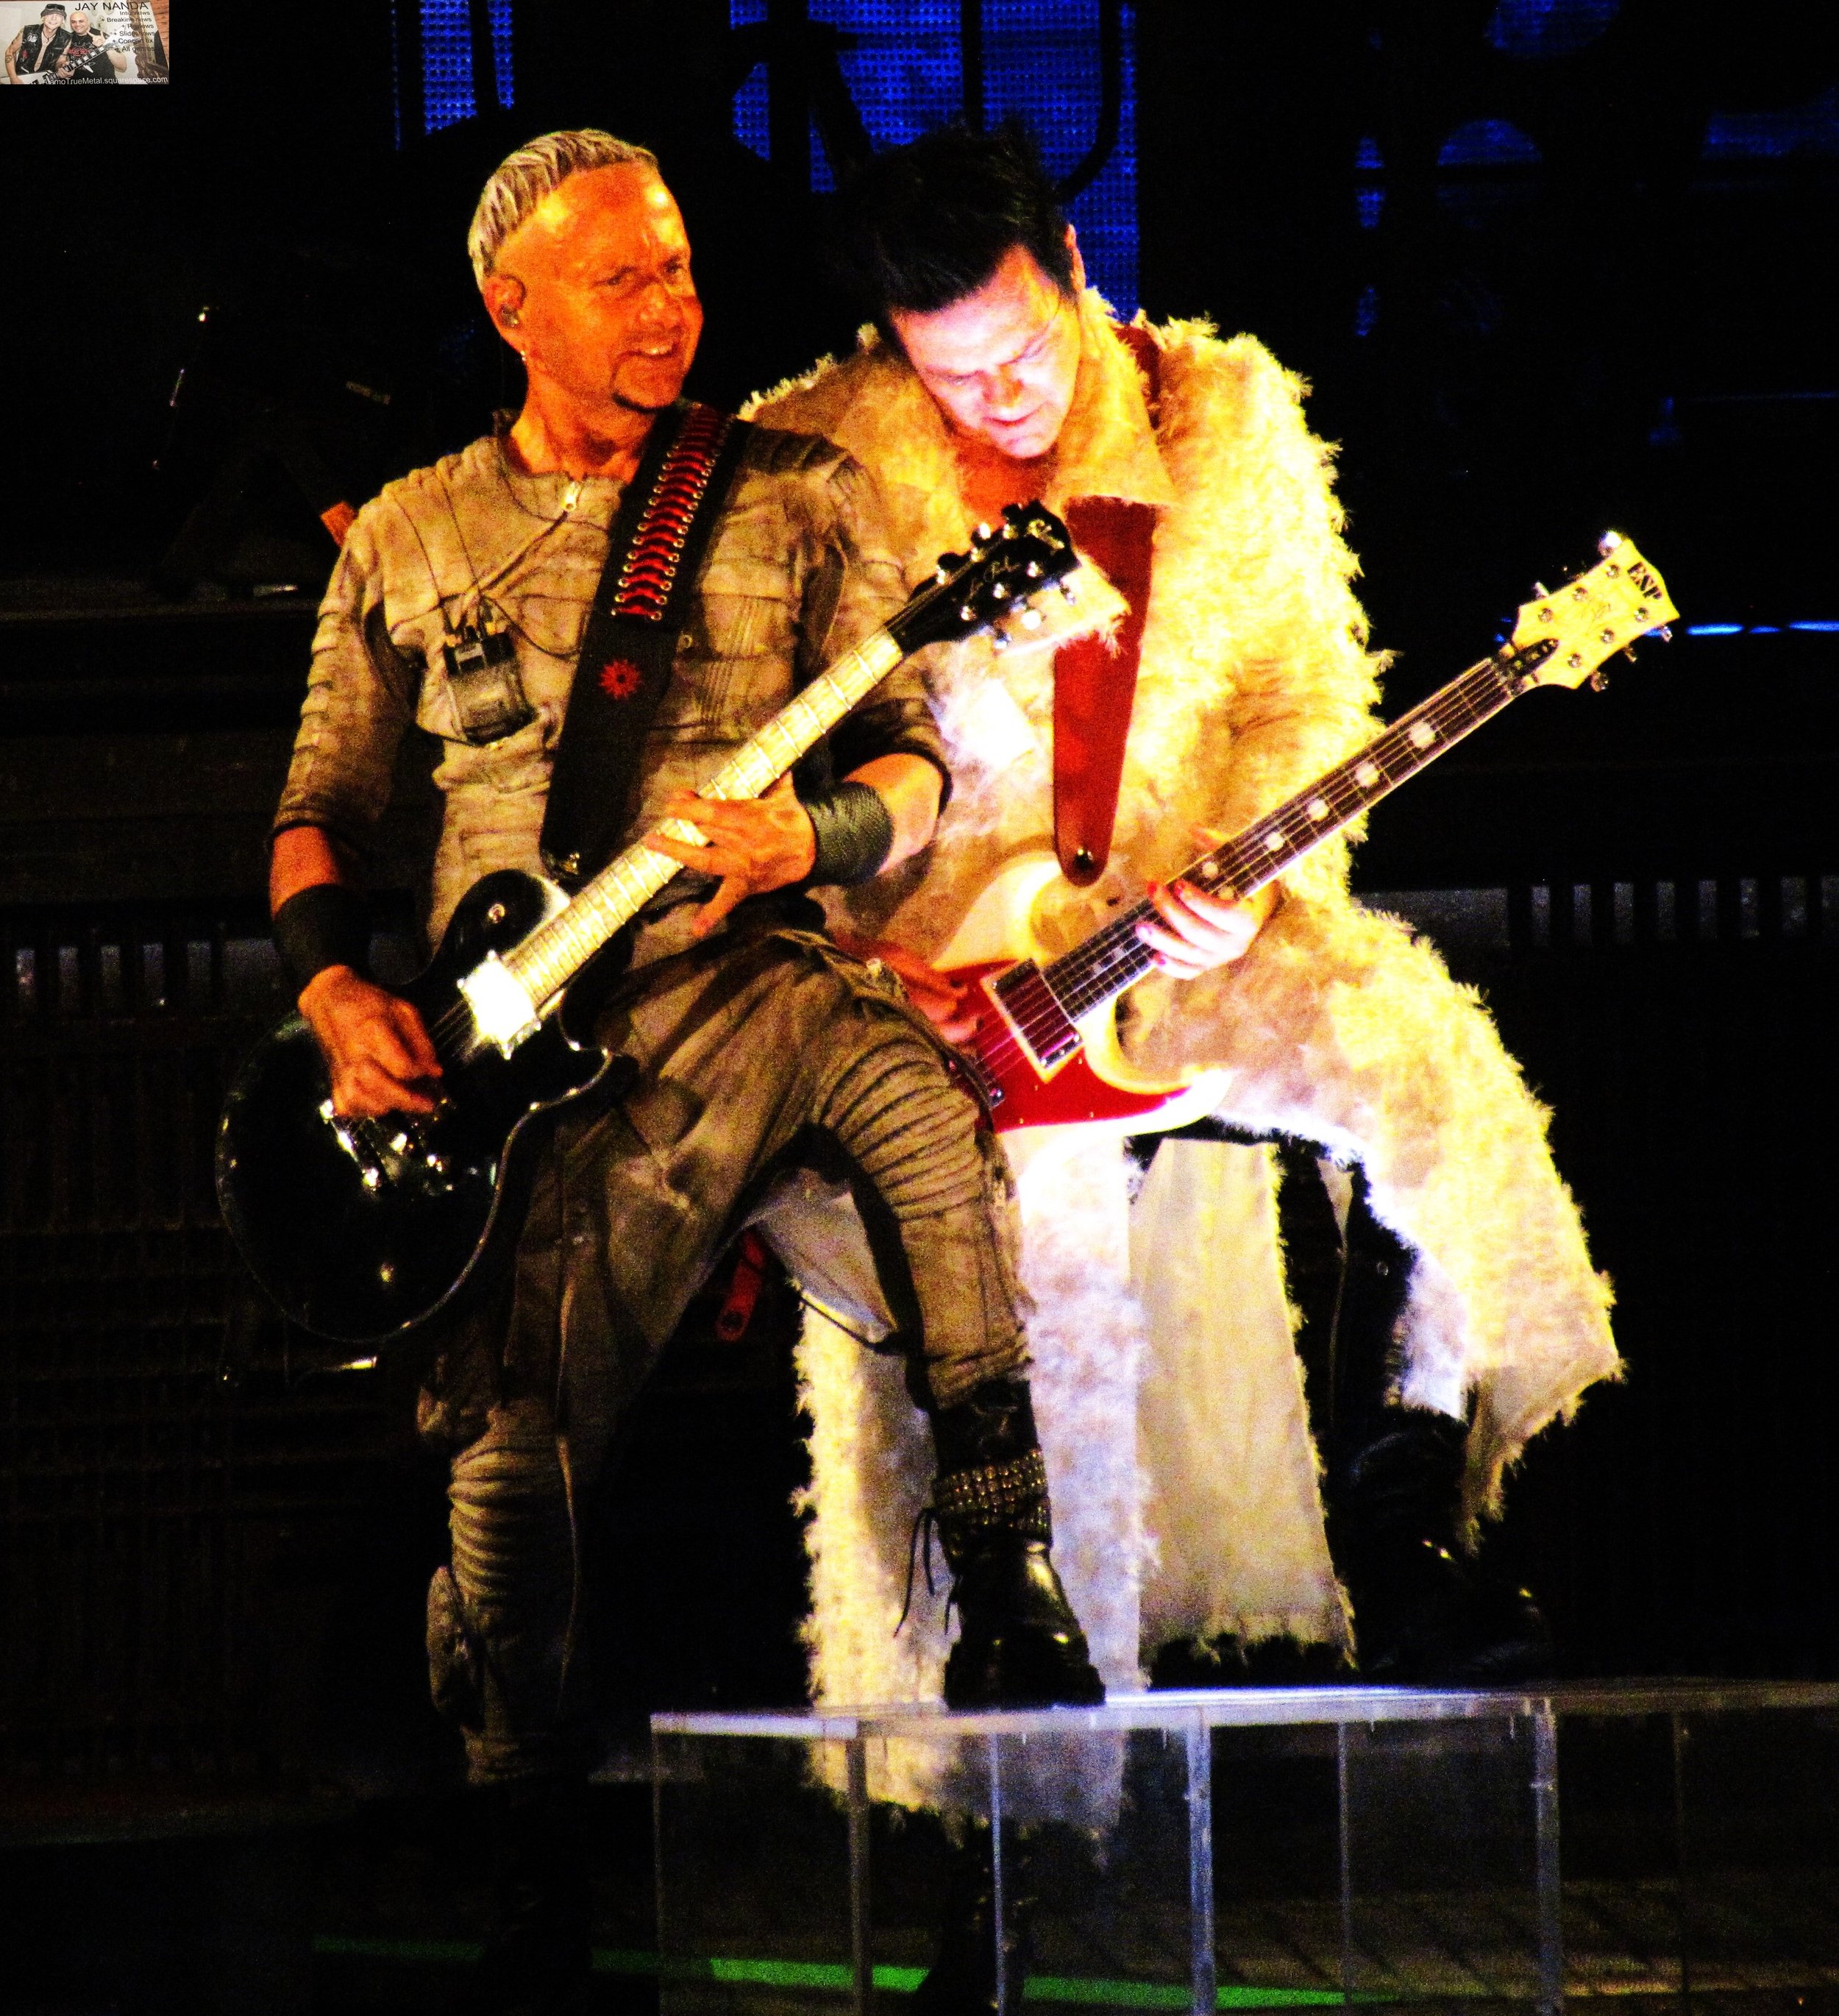  Guitarists Paul Landers (left) and Richard Kruspe join forces for some riffs — and later would team up for a kiss. 